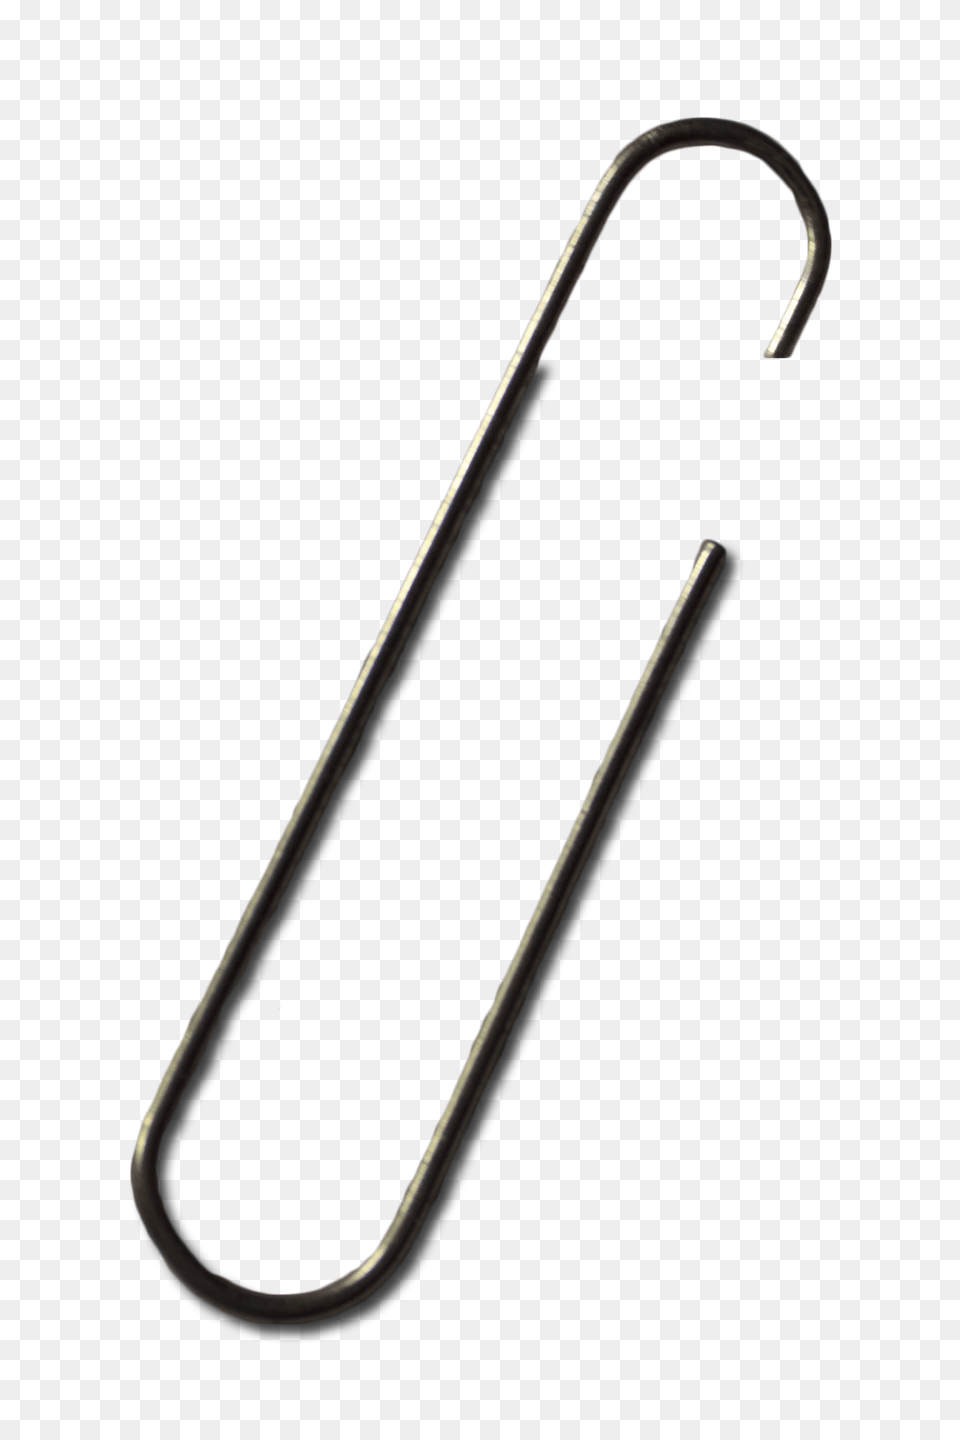 Best Paperclip Transparent Background On Hipwallpaper, Electronics, Hardware Free Png